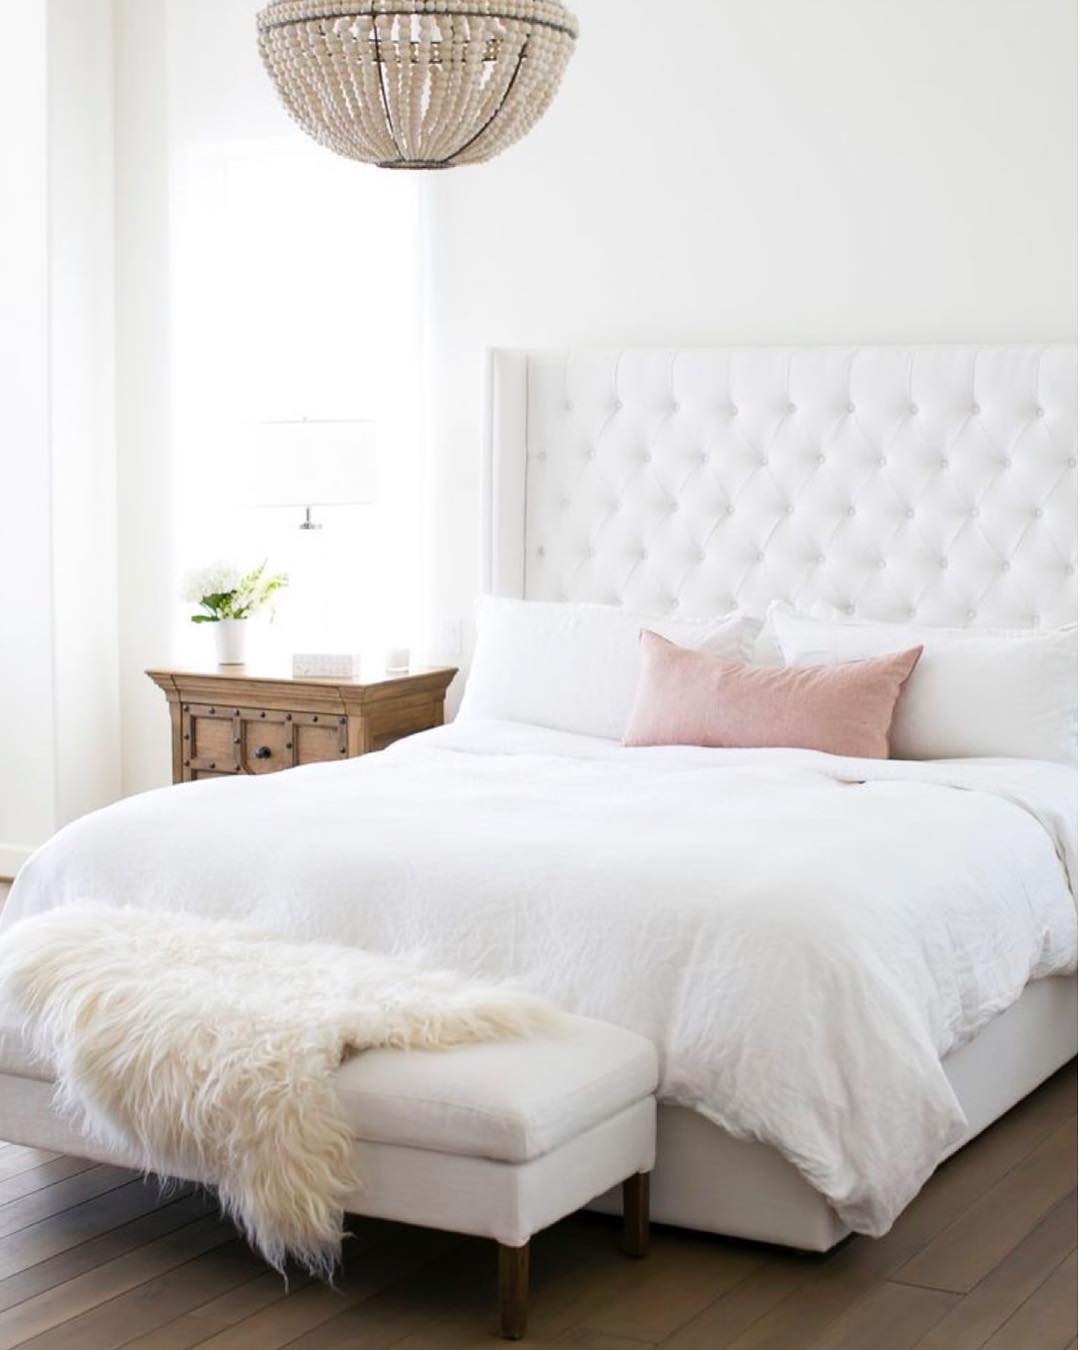 Contemporary white bedroom. Photo by Instagram user @ashleypeacock